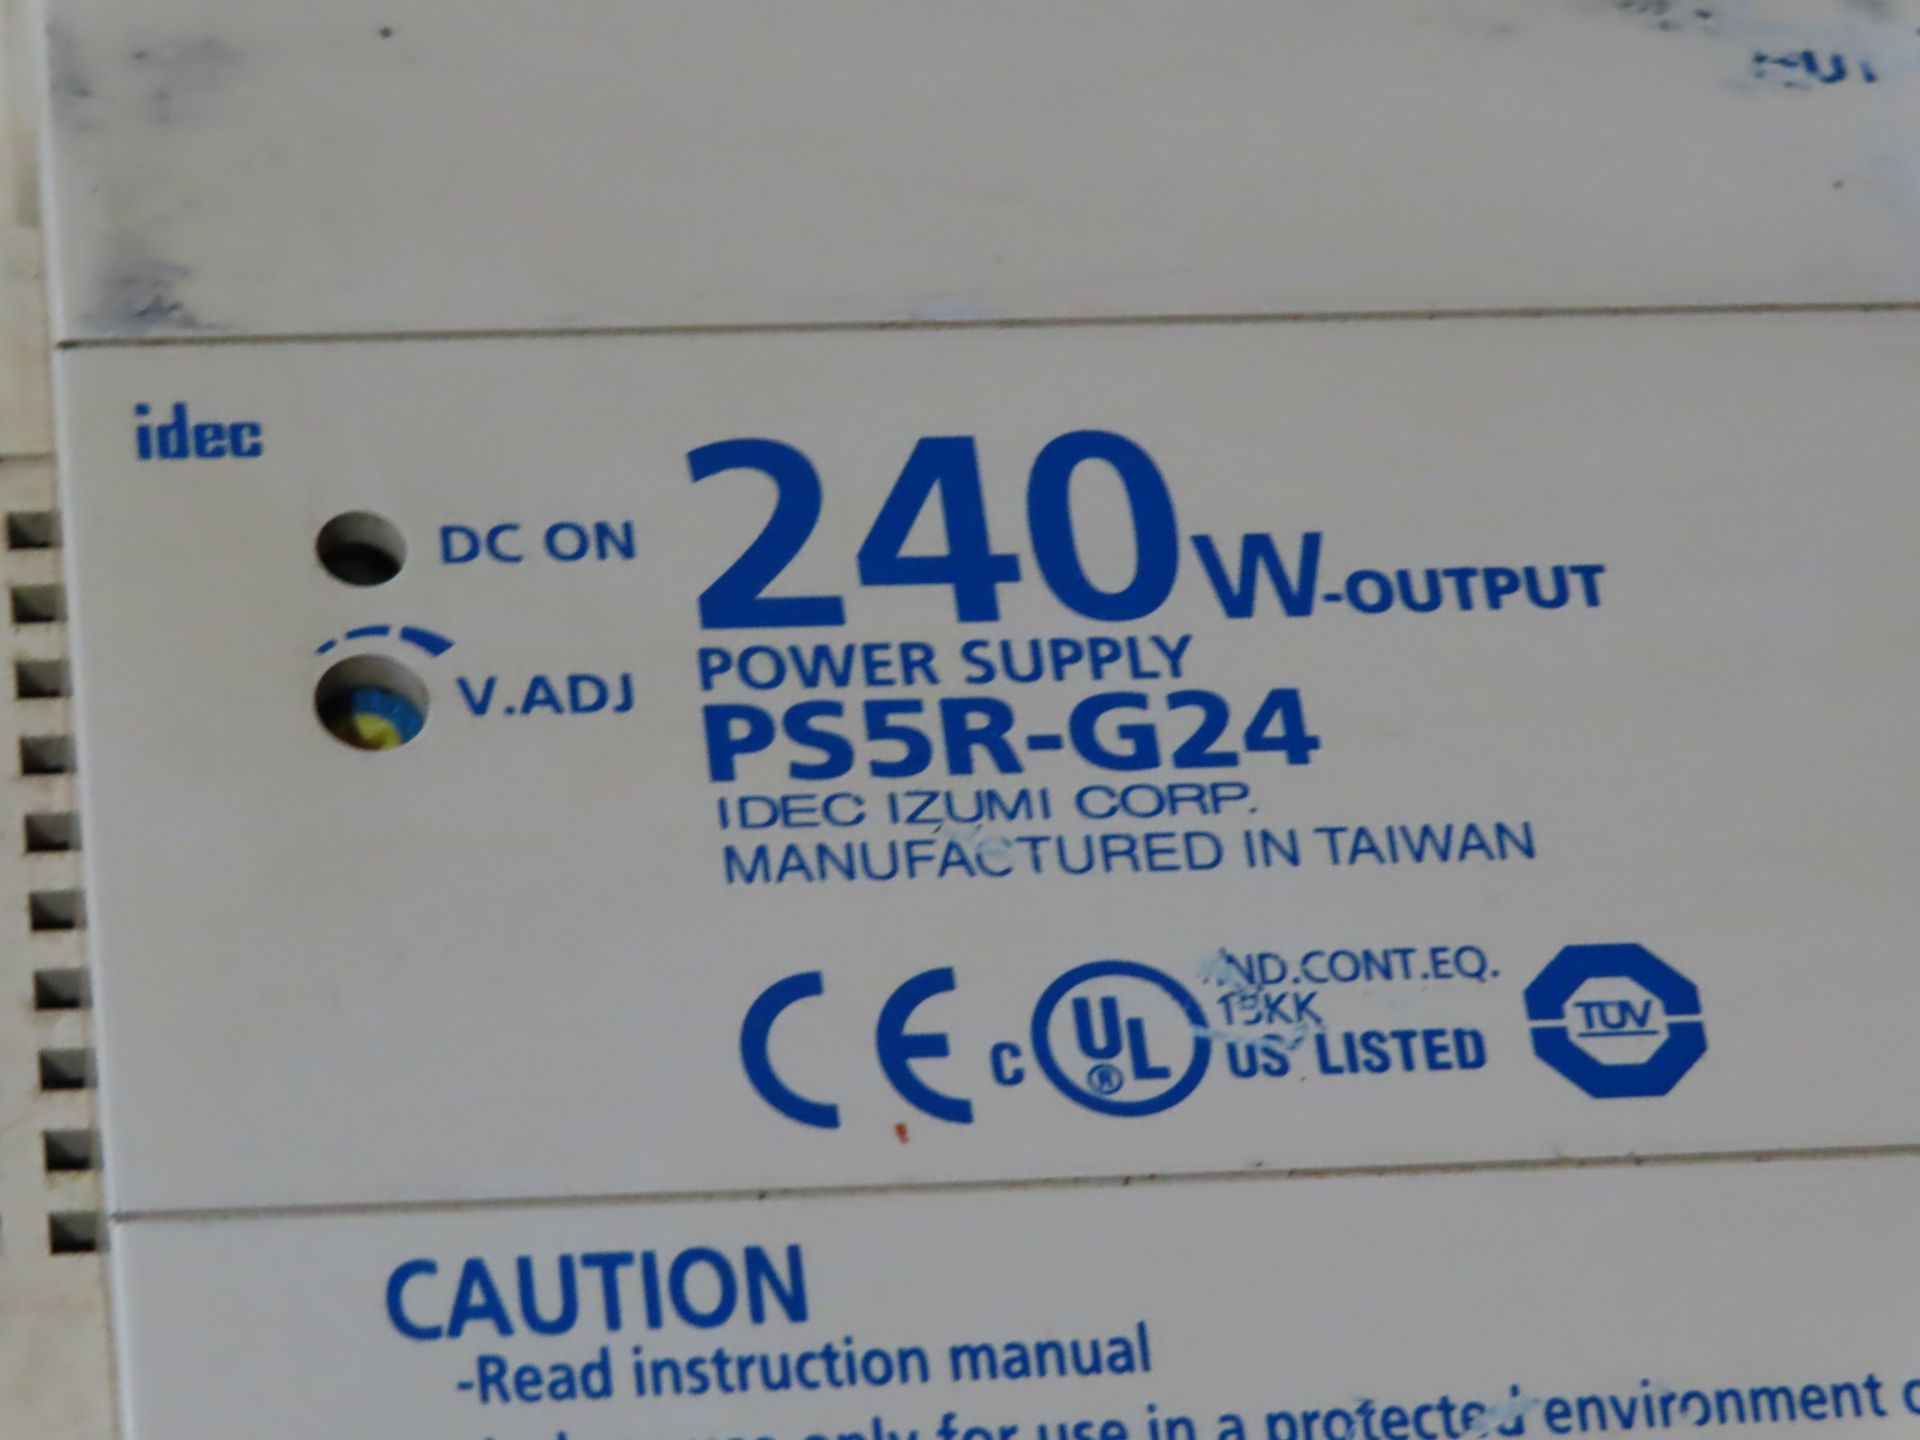 Idec power supply model PS5R-G24, used, as always with Brolyn LLC auctions, all lots can be picked - Image 2 of 2